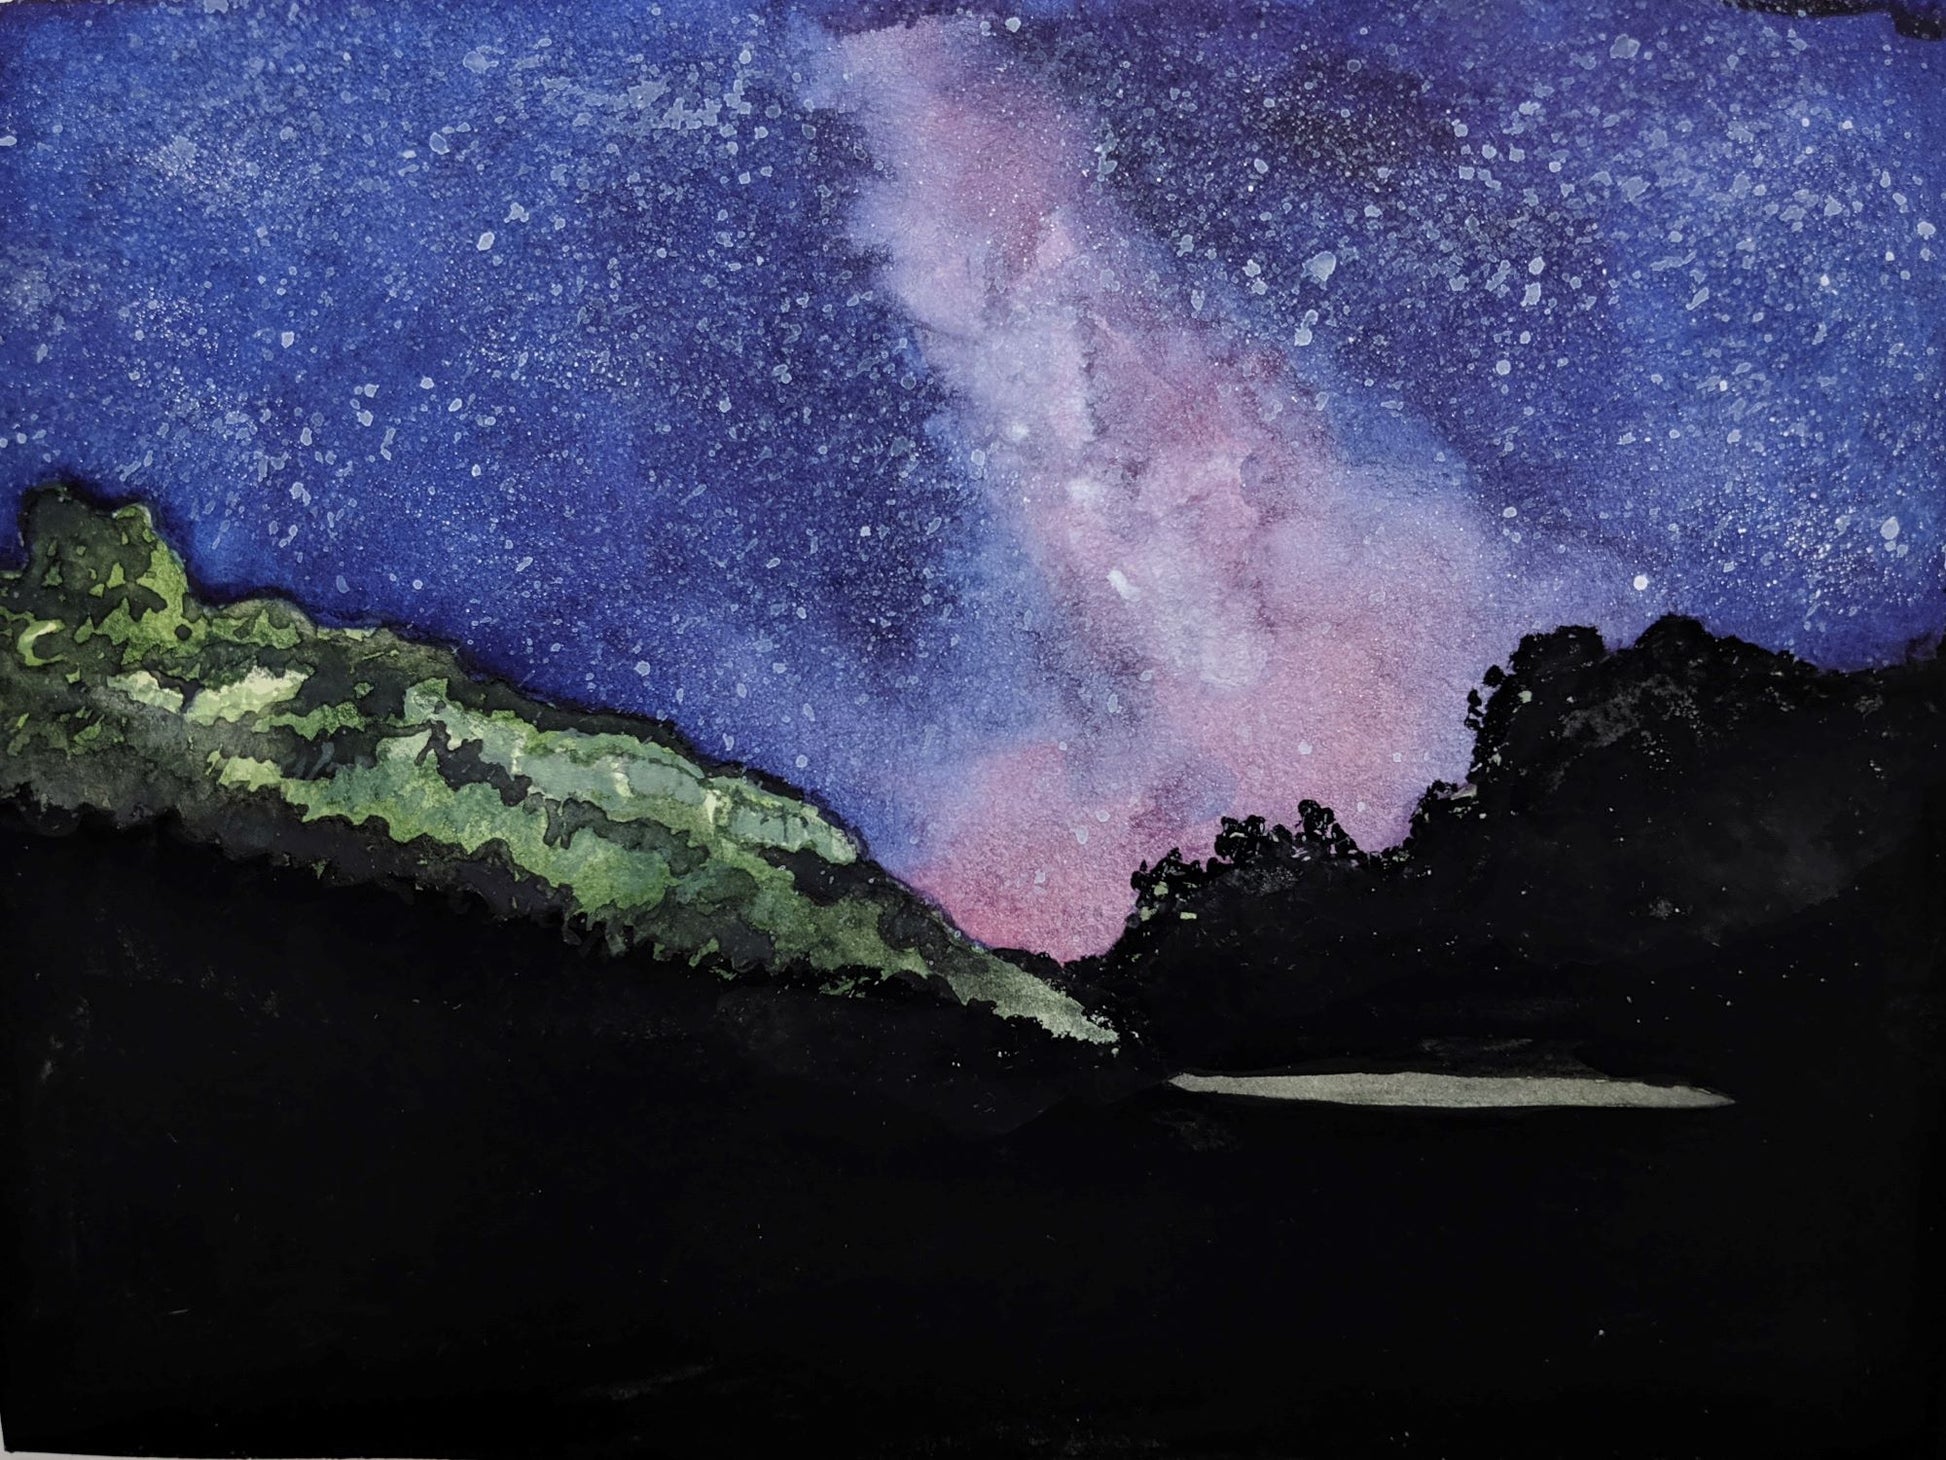 Chris's Galaxy watercolor painting